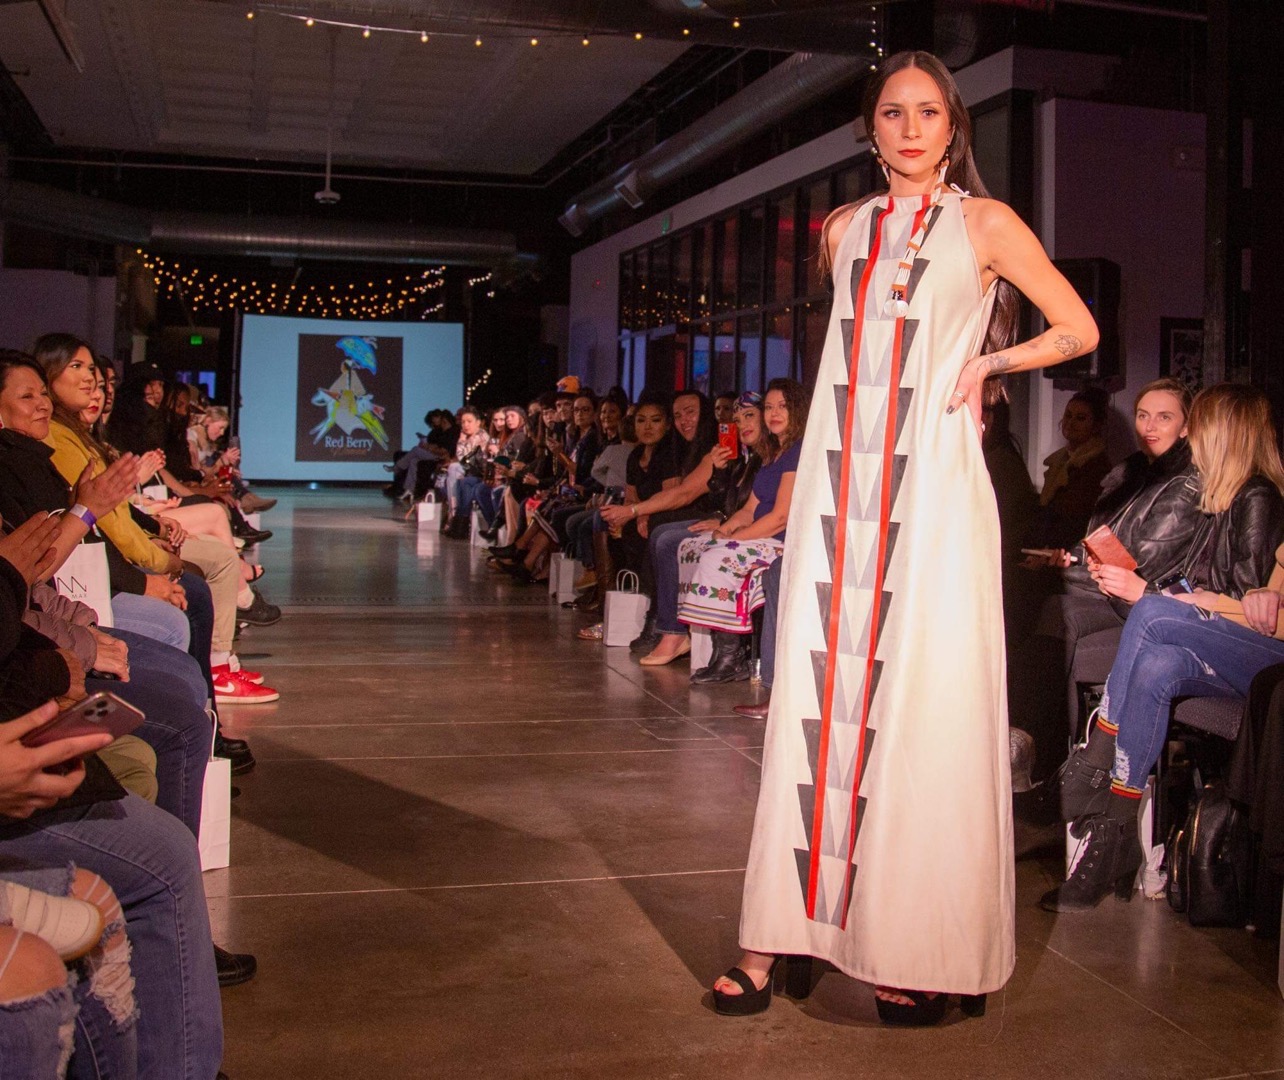 Two Indigenous Fashion Designers Up For Designer of the Year at Phoenix Fashion Week